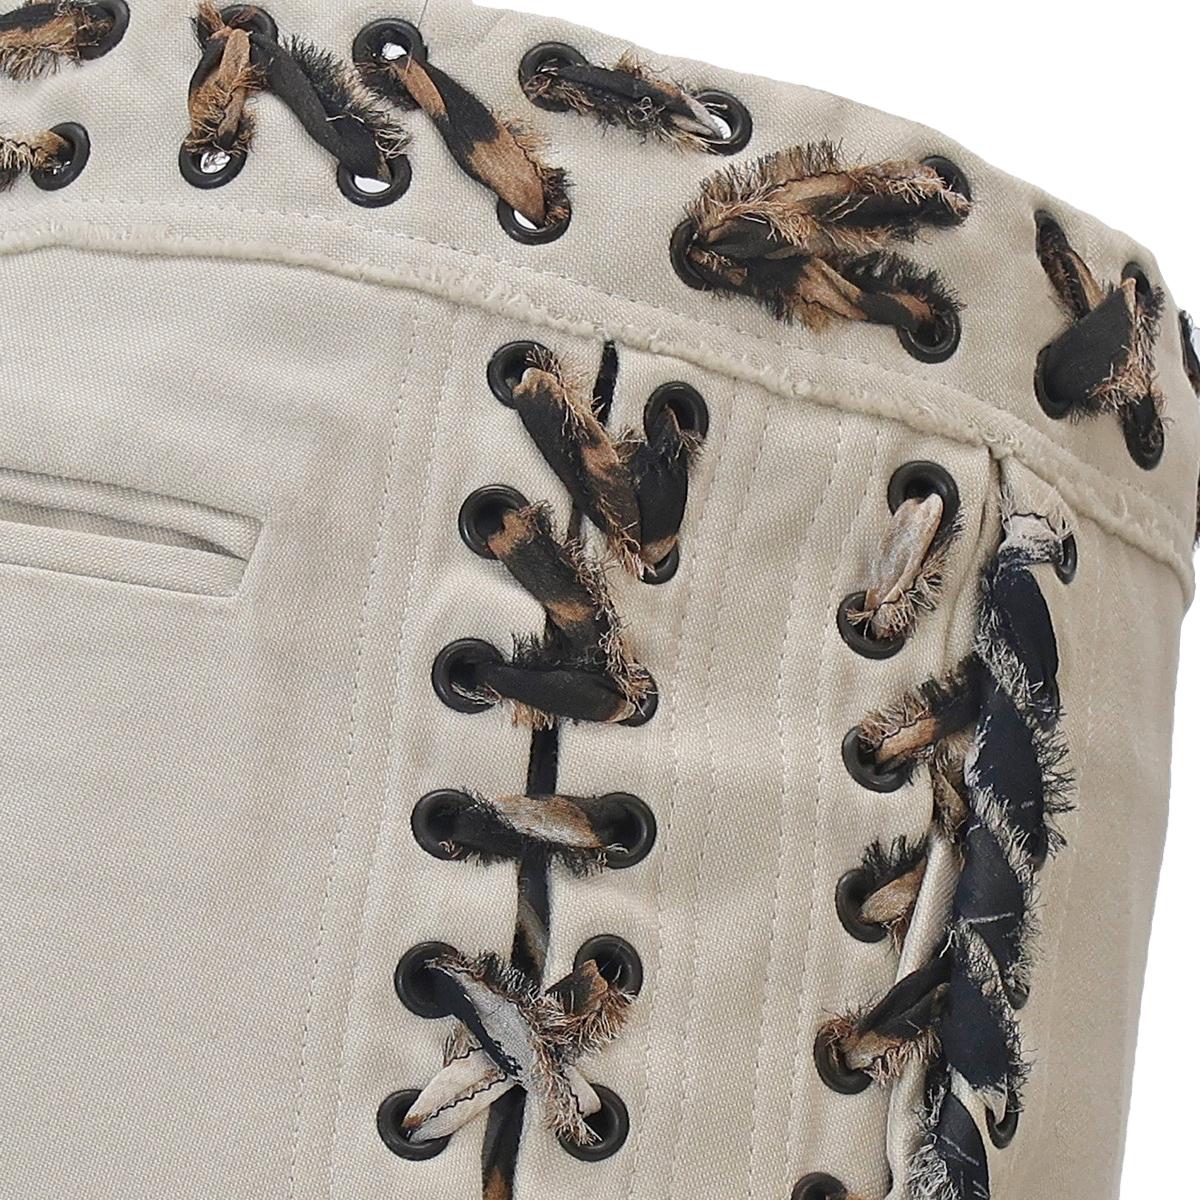 Yves Saint Laurent by Tom Ford SS-02 Cotton Laced Safari Skirt with Leopard Trim In Good Condition For Sale In Brussels, BE